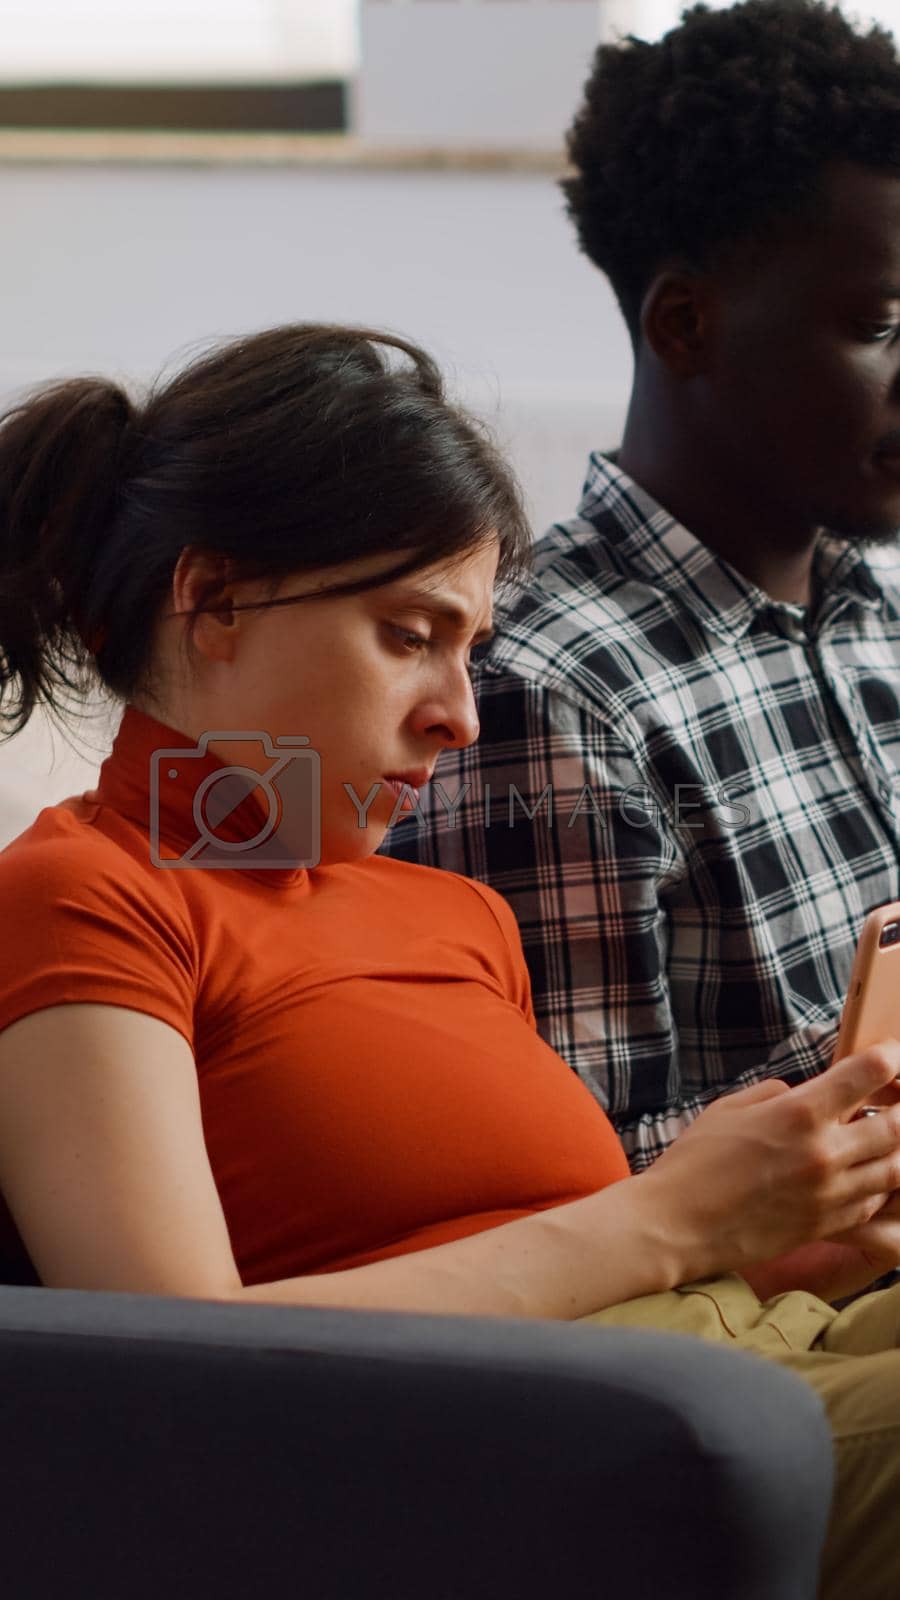 Modern interracial people holding smartphones on couch while sitting together in living room. Young mixed race couple using devices and technology for entertainment as lifestyle